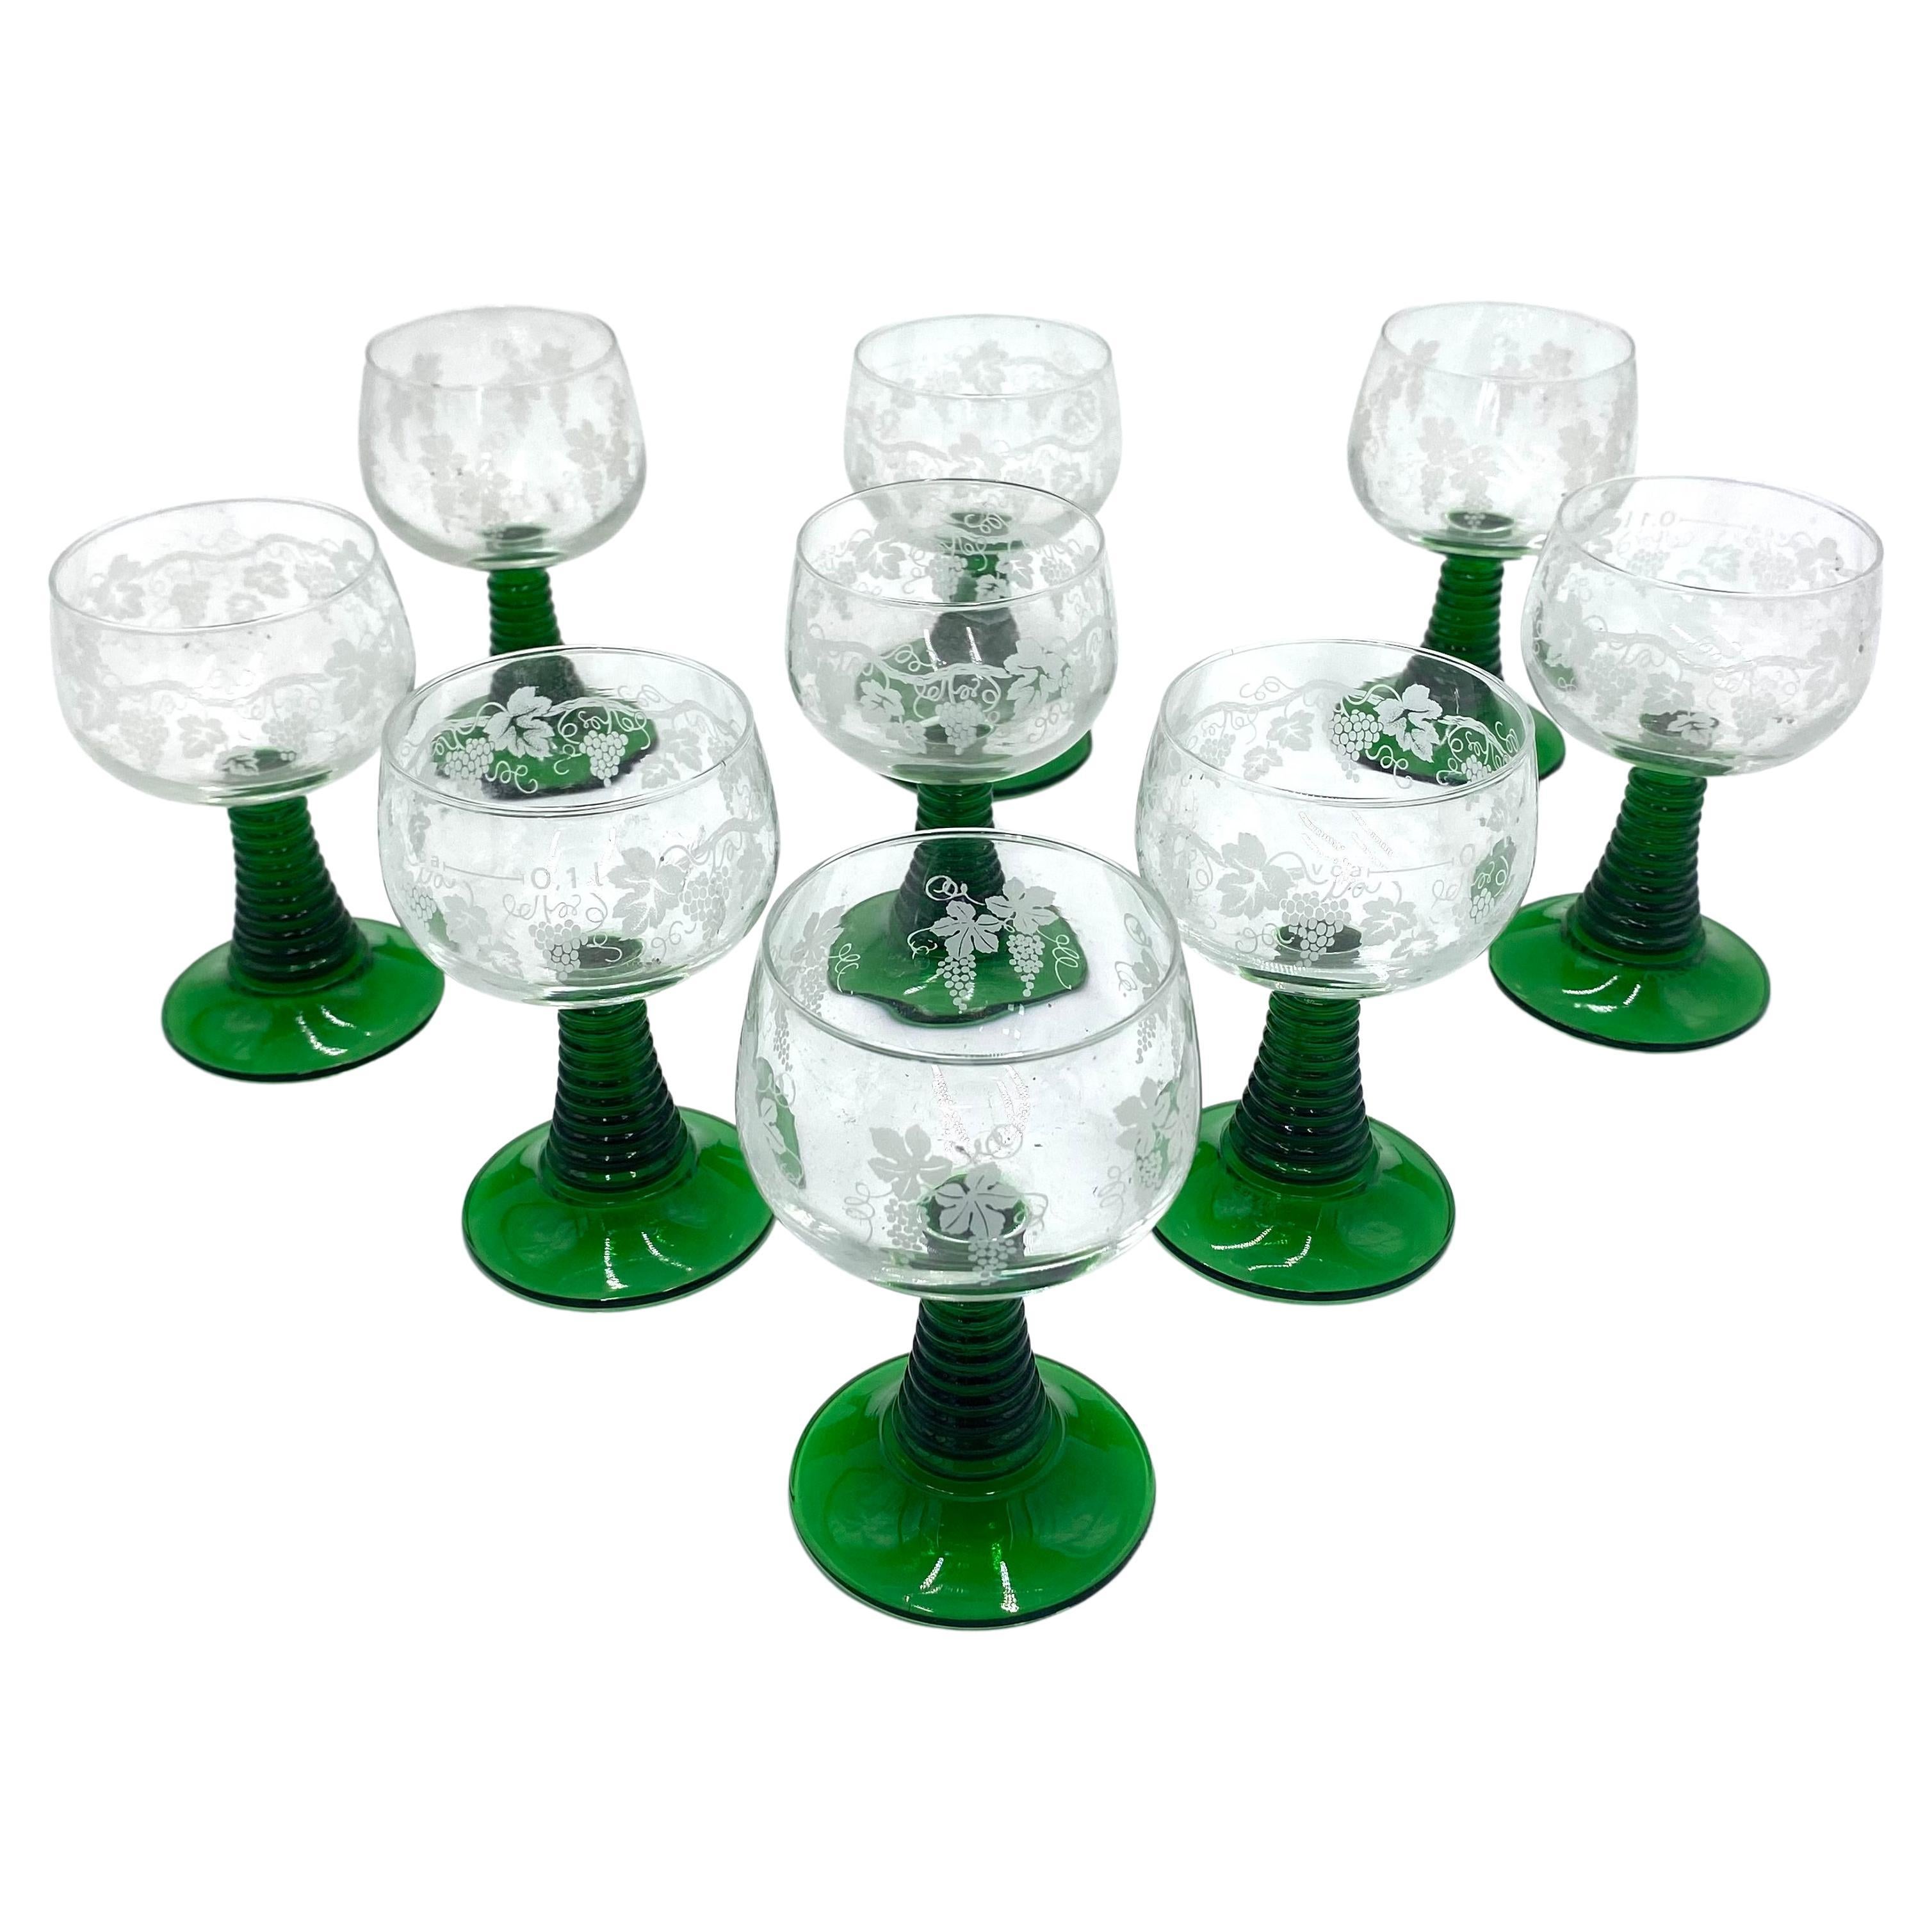 Glasses on a Green Stem, France, Mid-20th Century